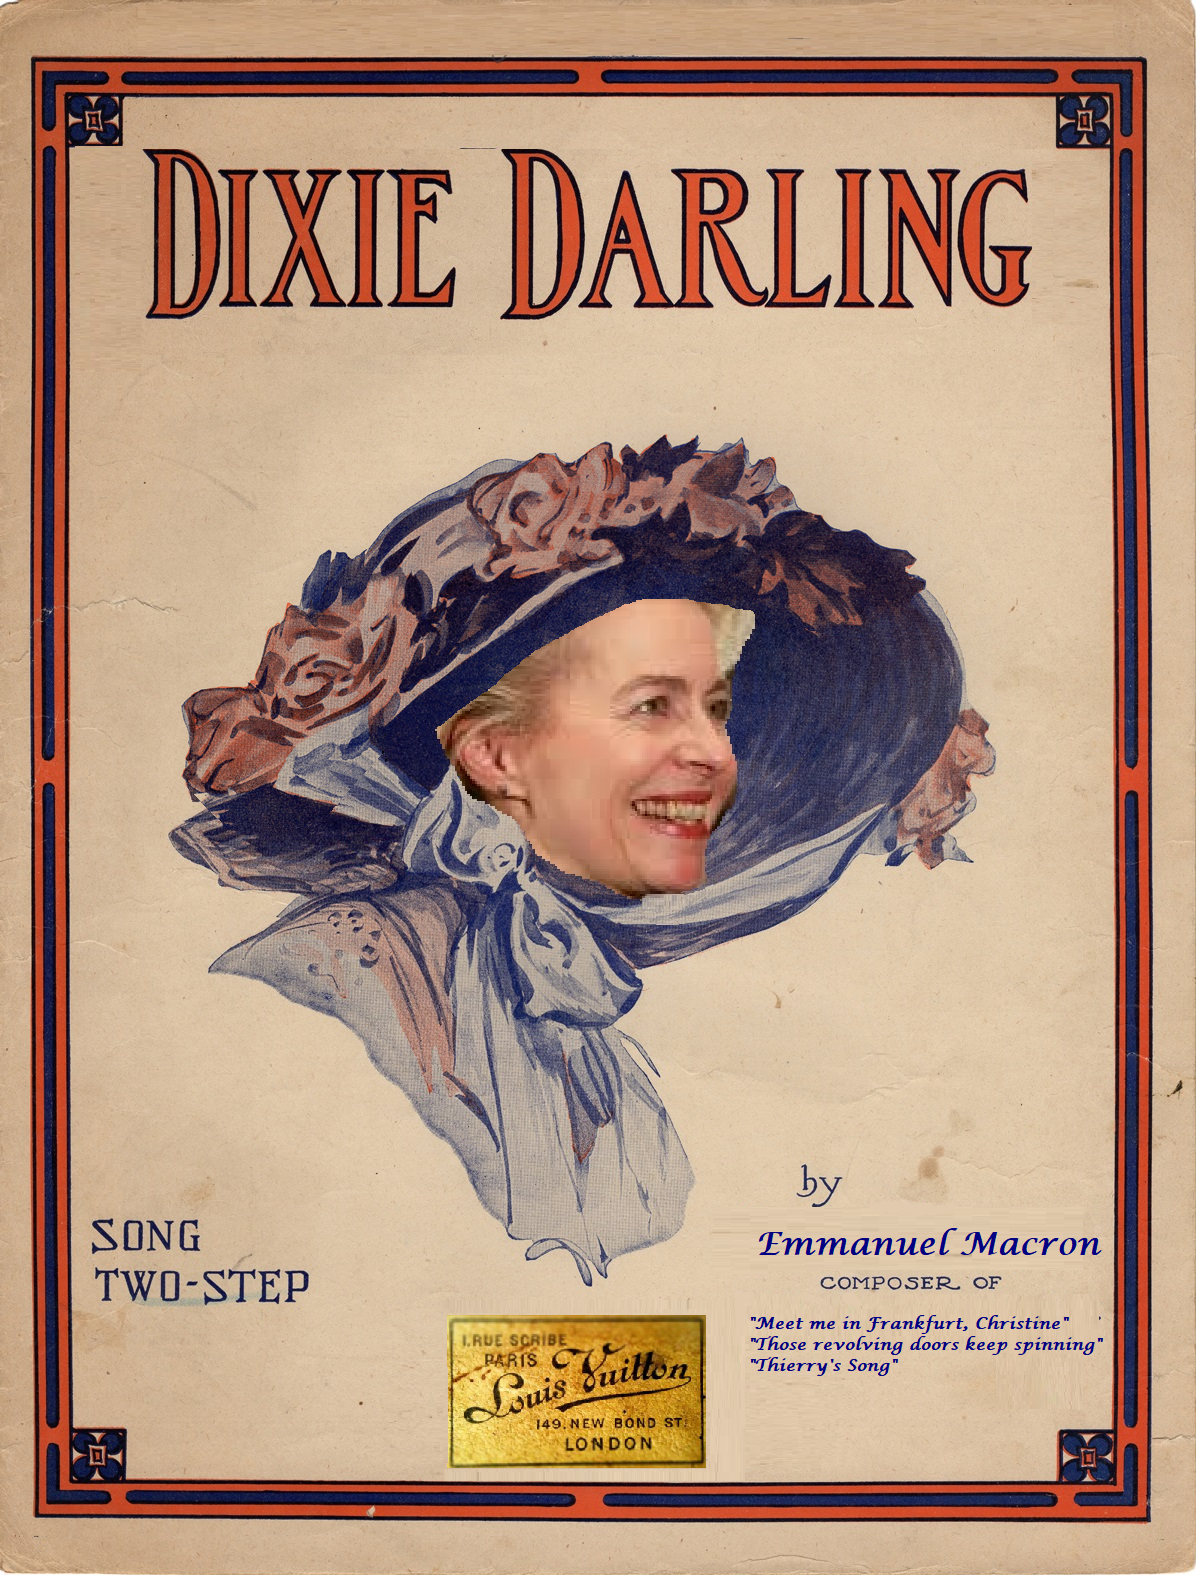 Dixie darling